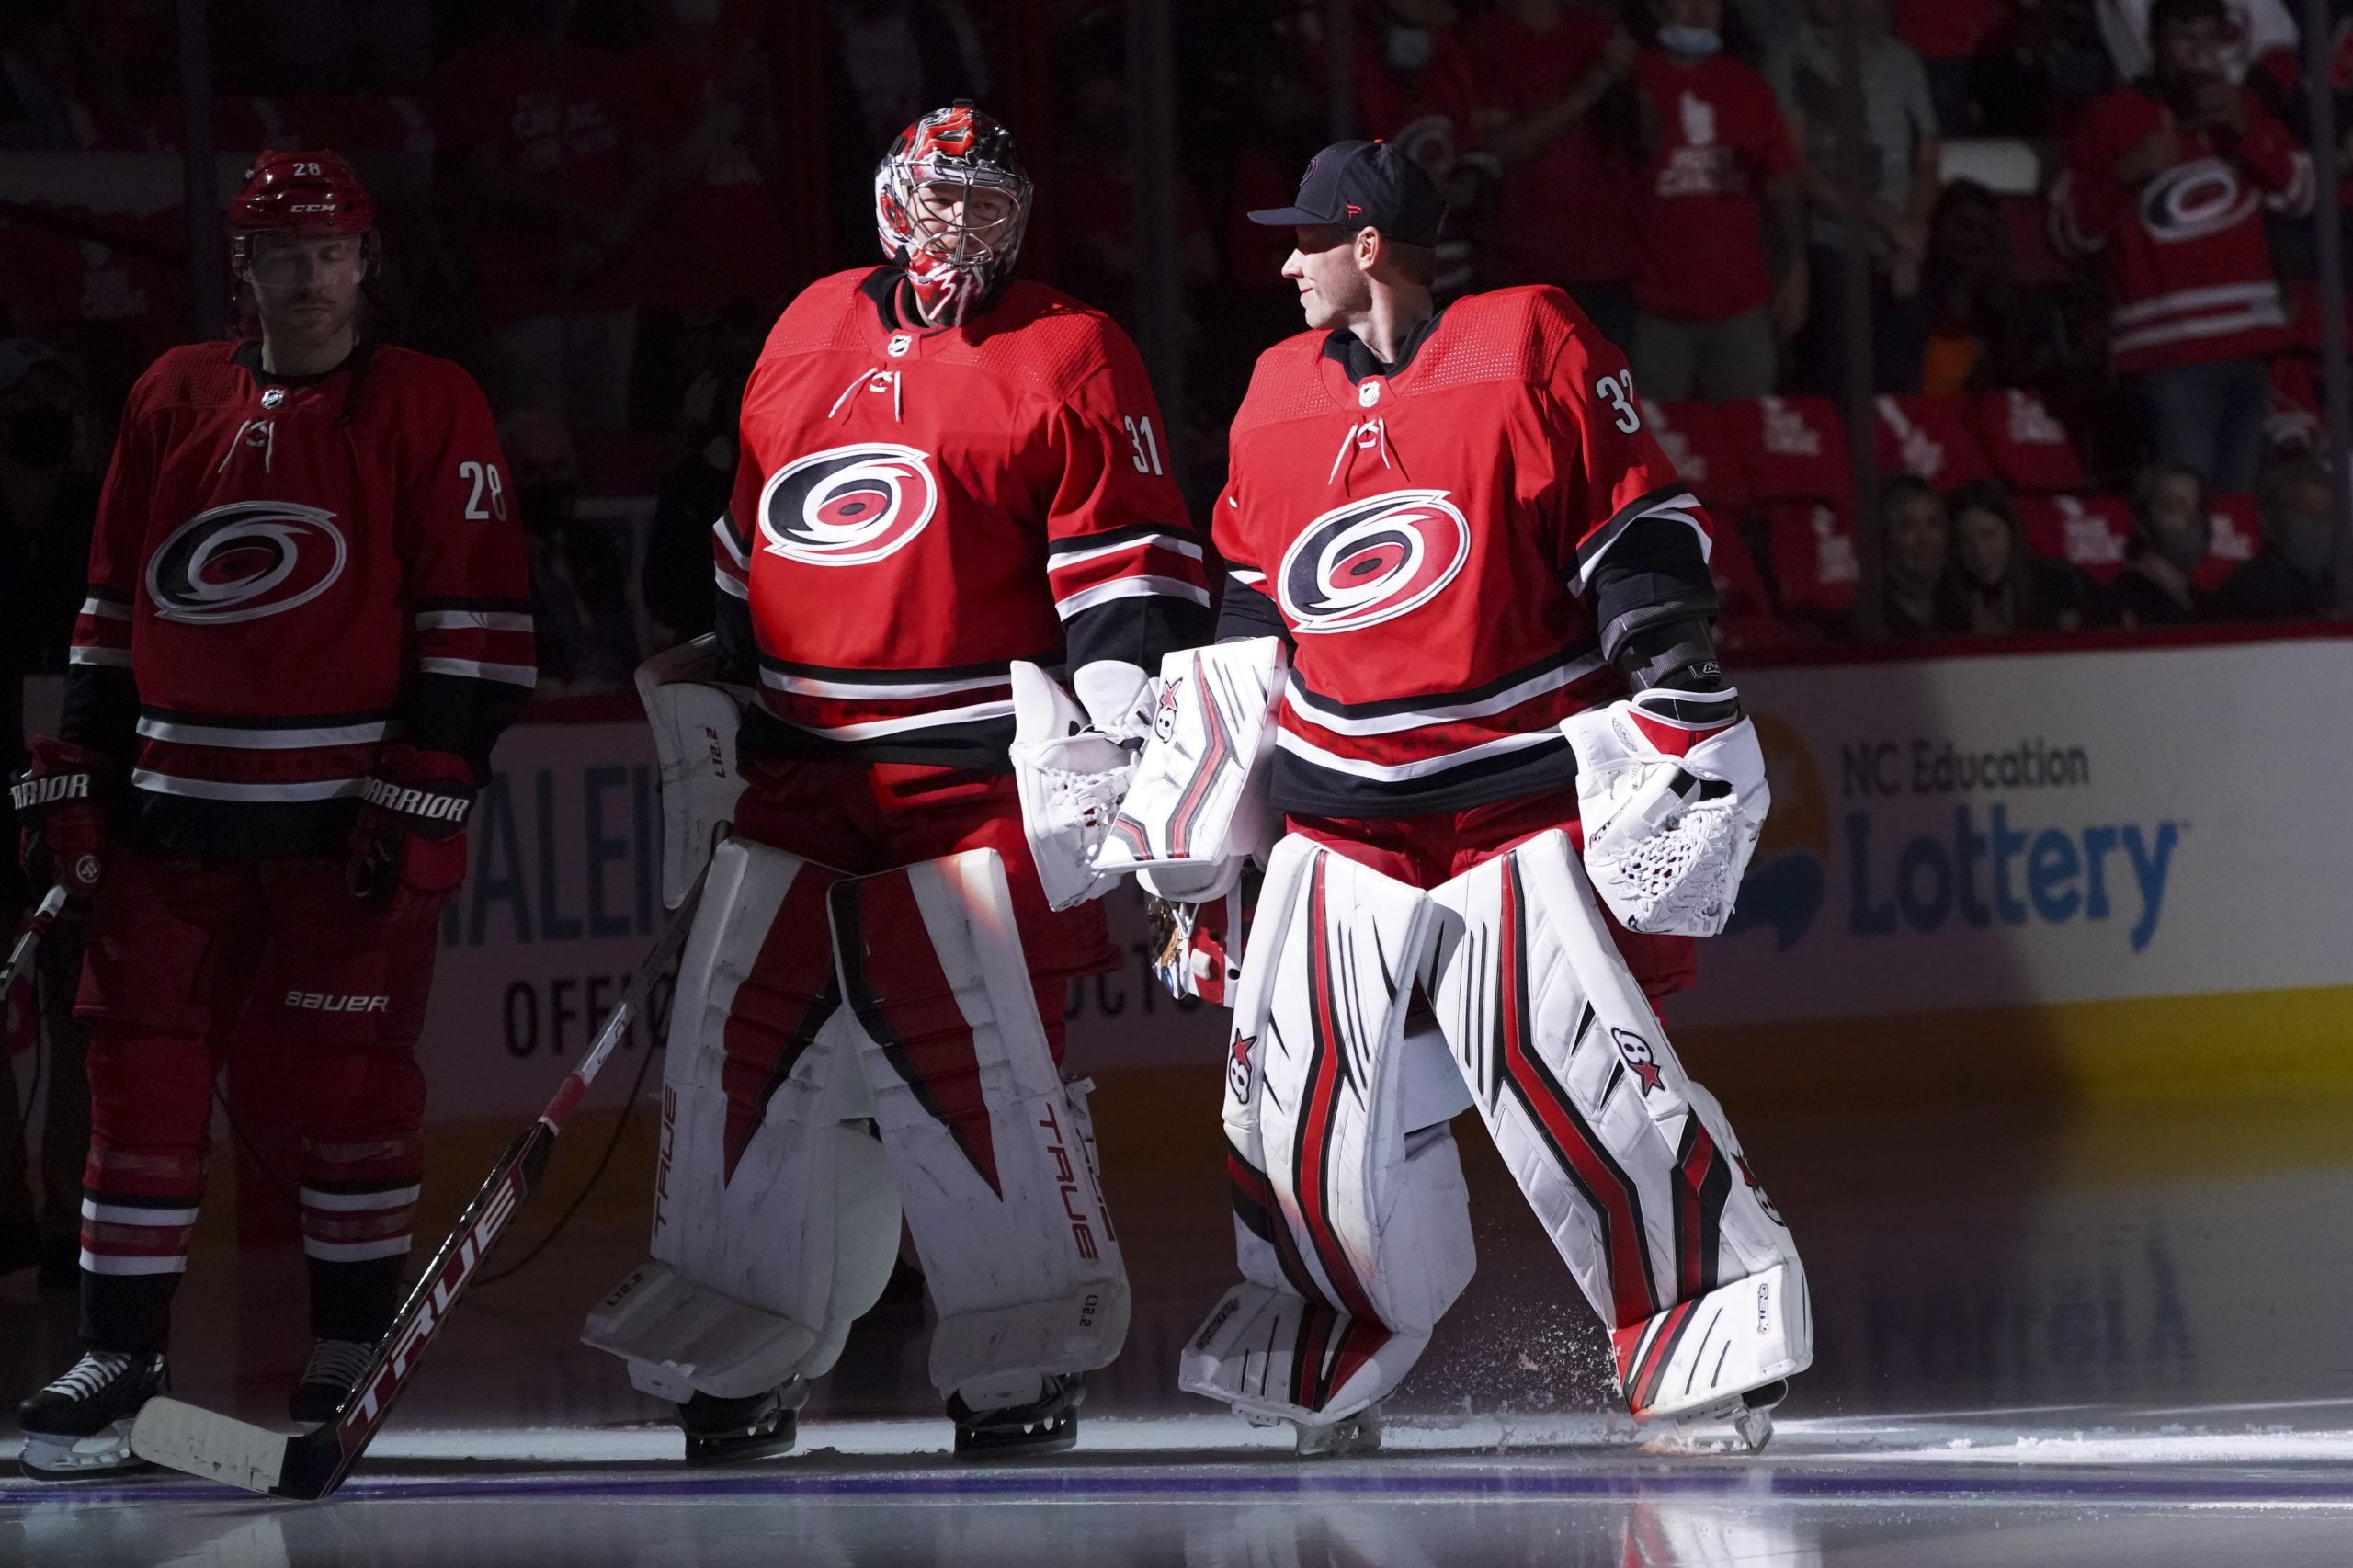 Facing 'Canes, Devils must erase another bad start